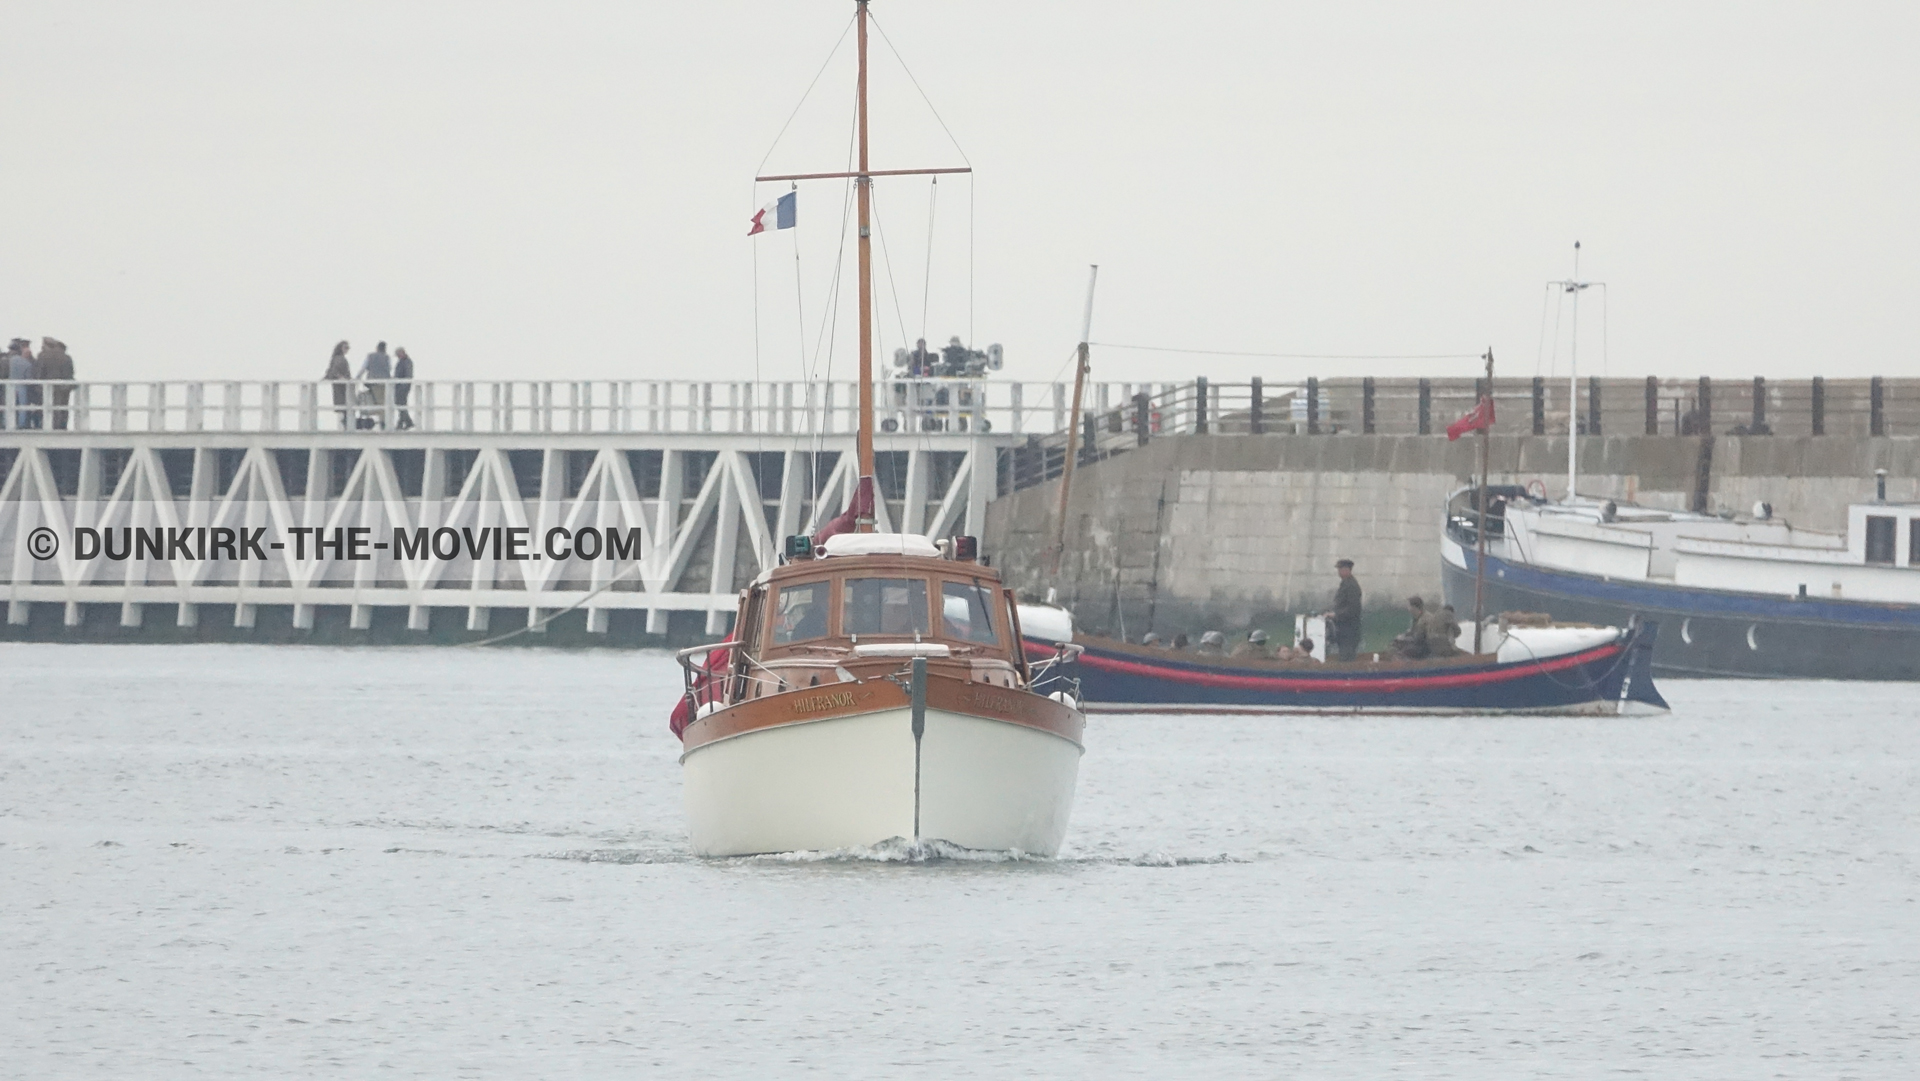 Picture with boat, EST pier, Henry Finlay lifeboat,  from behind the scene of the Dunkirk movie by Nolan